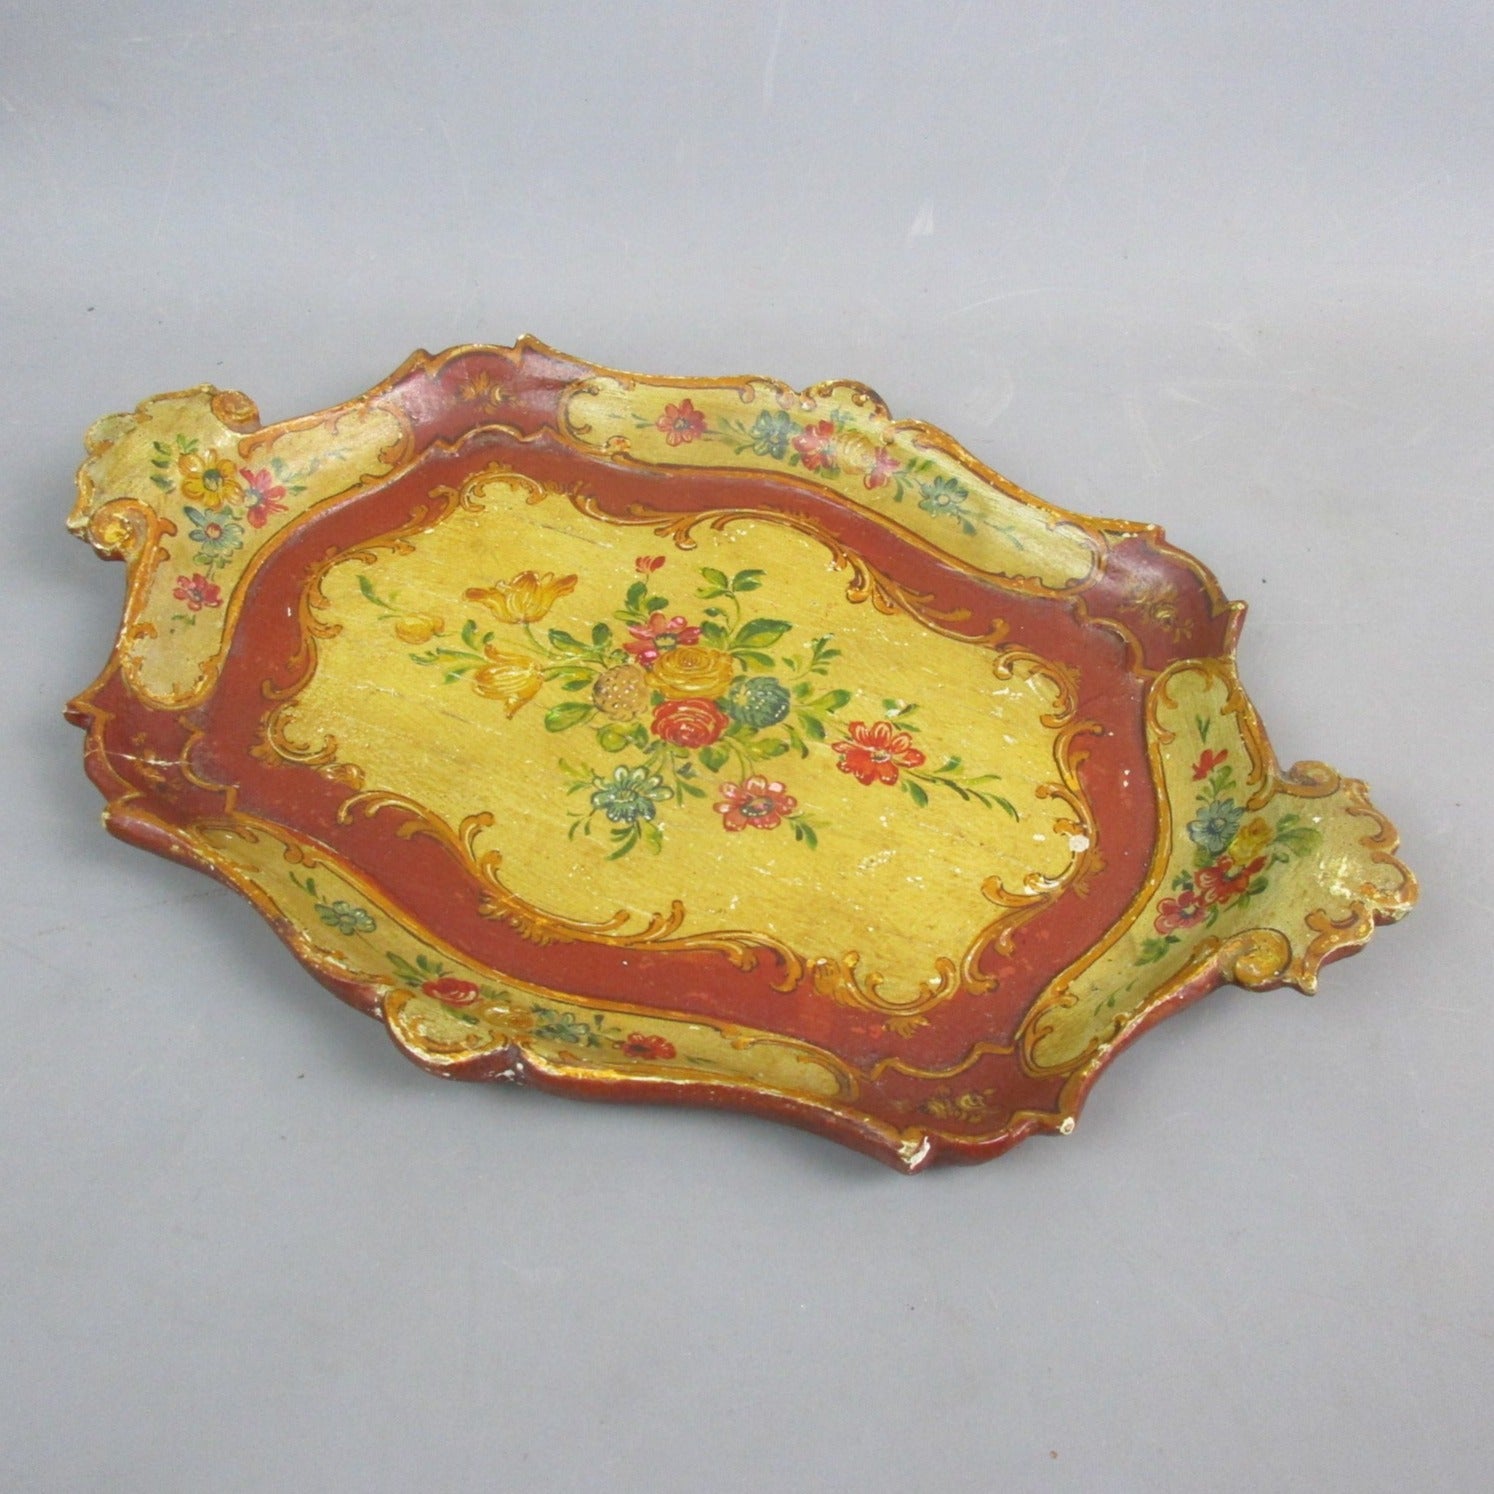 Hand Painted Red & Yellow Italian Floral Design Wooden Tray Antique c1860